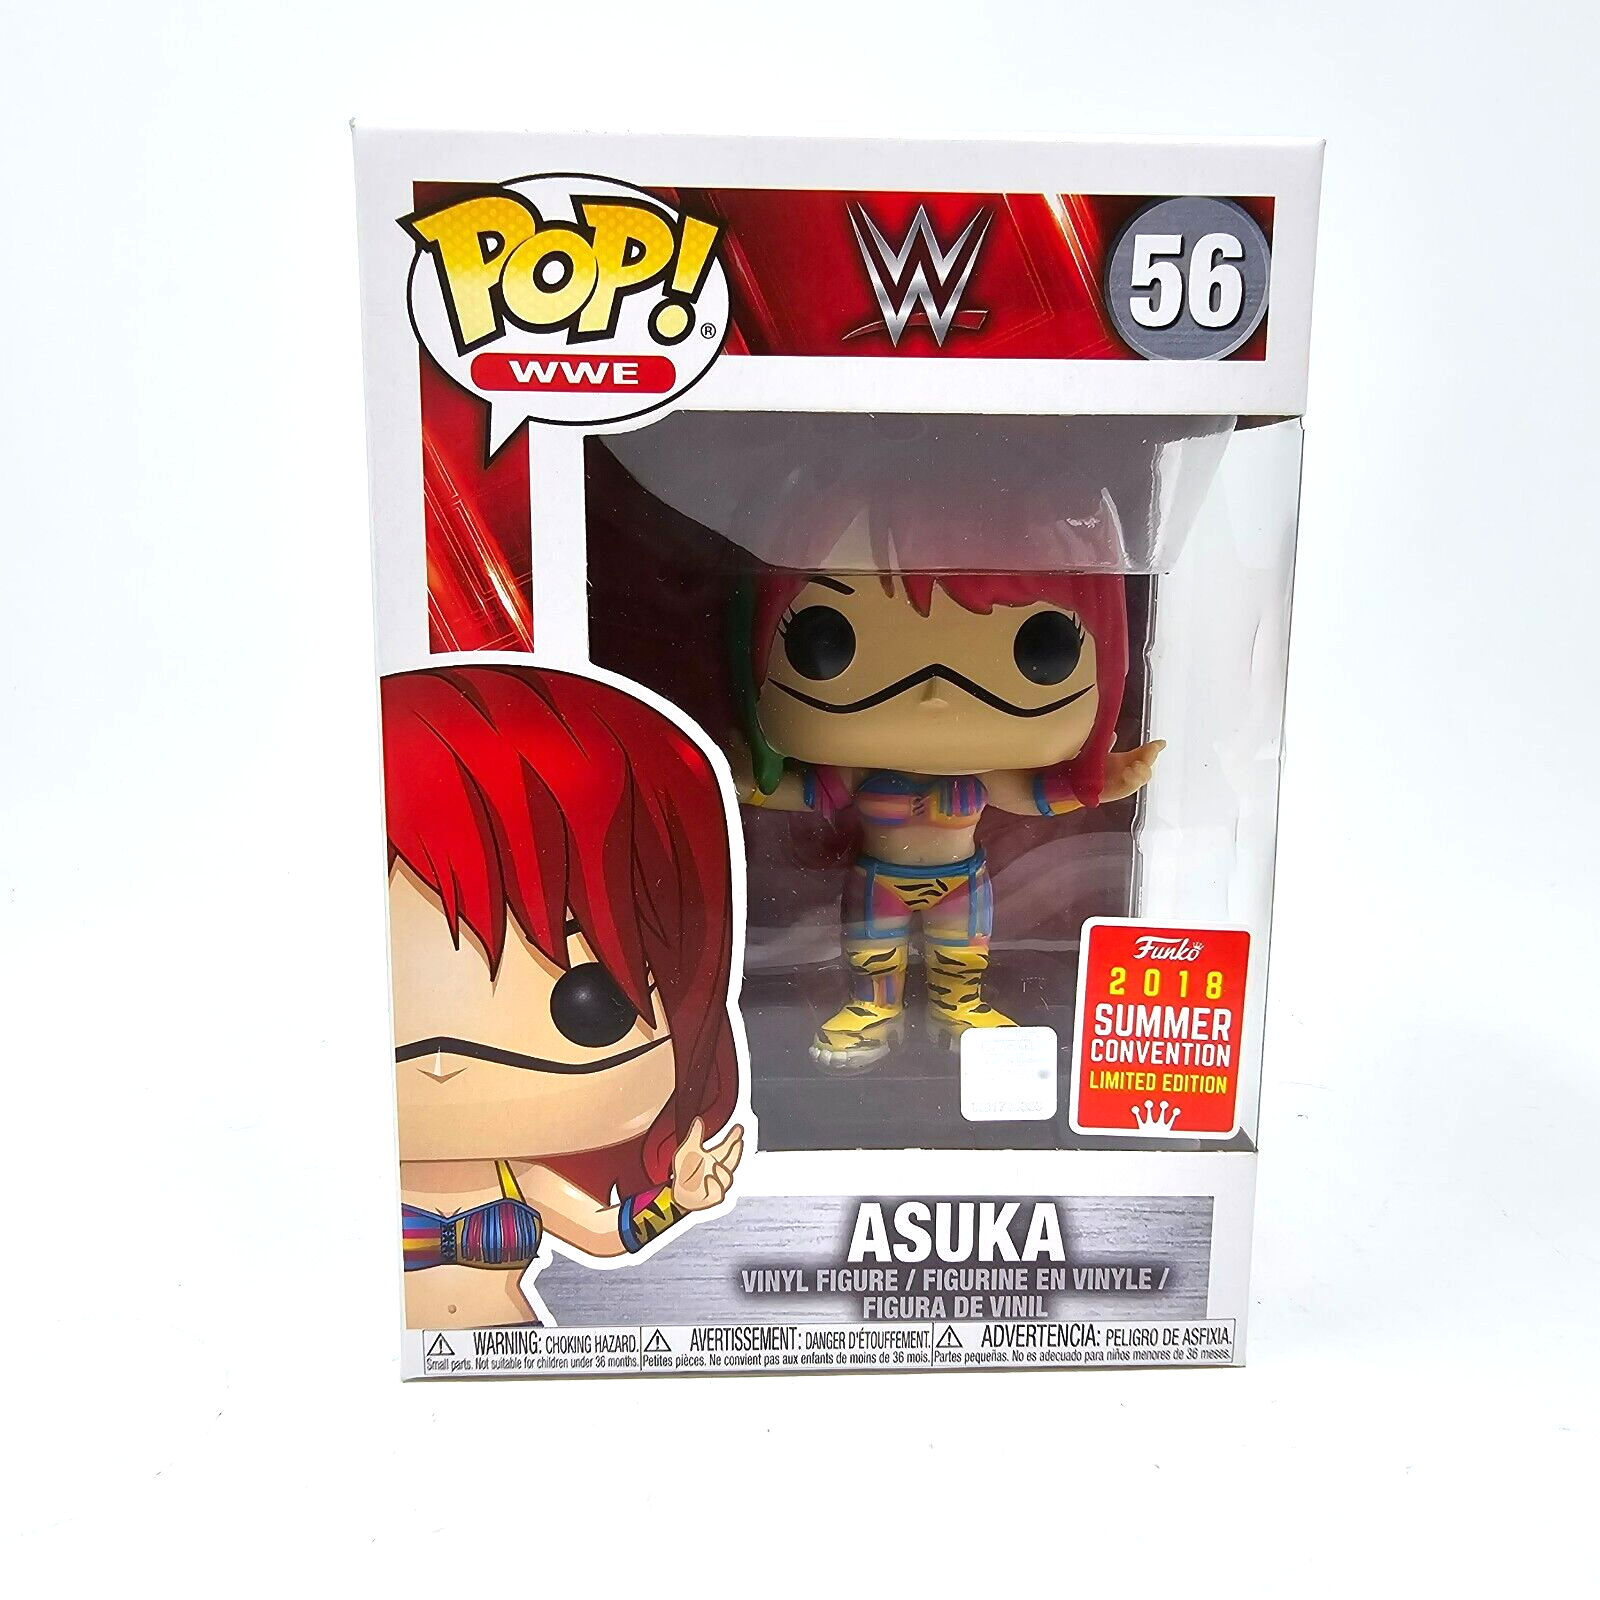 Primary image for Funko Pop WWE Asuka #56 2018 SDCC Summer Exclusive Vinyl Figure With Protector